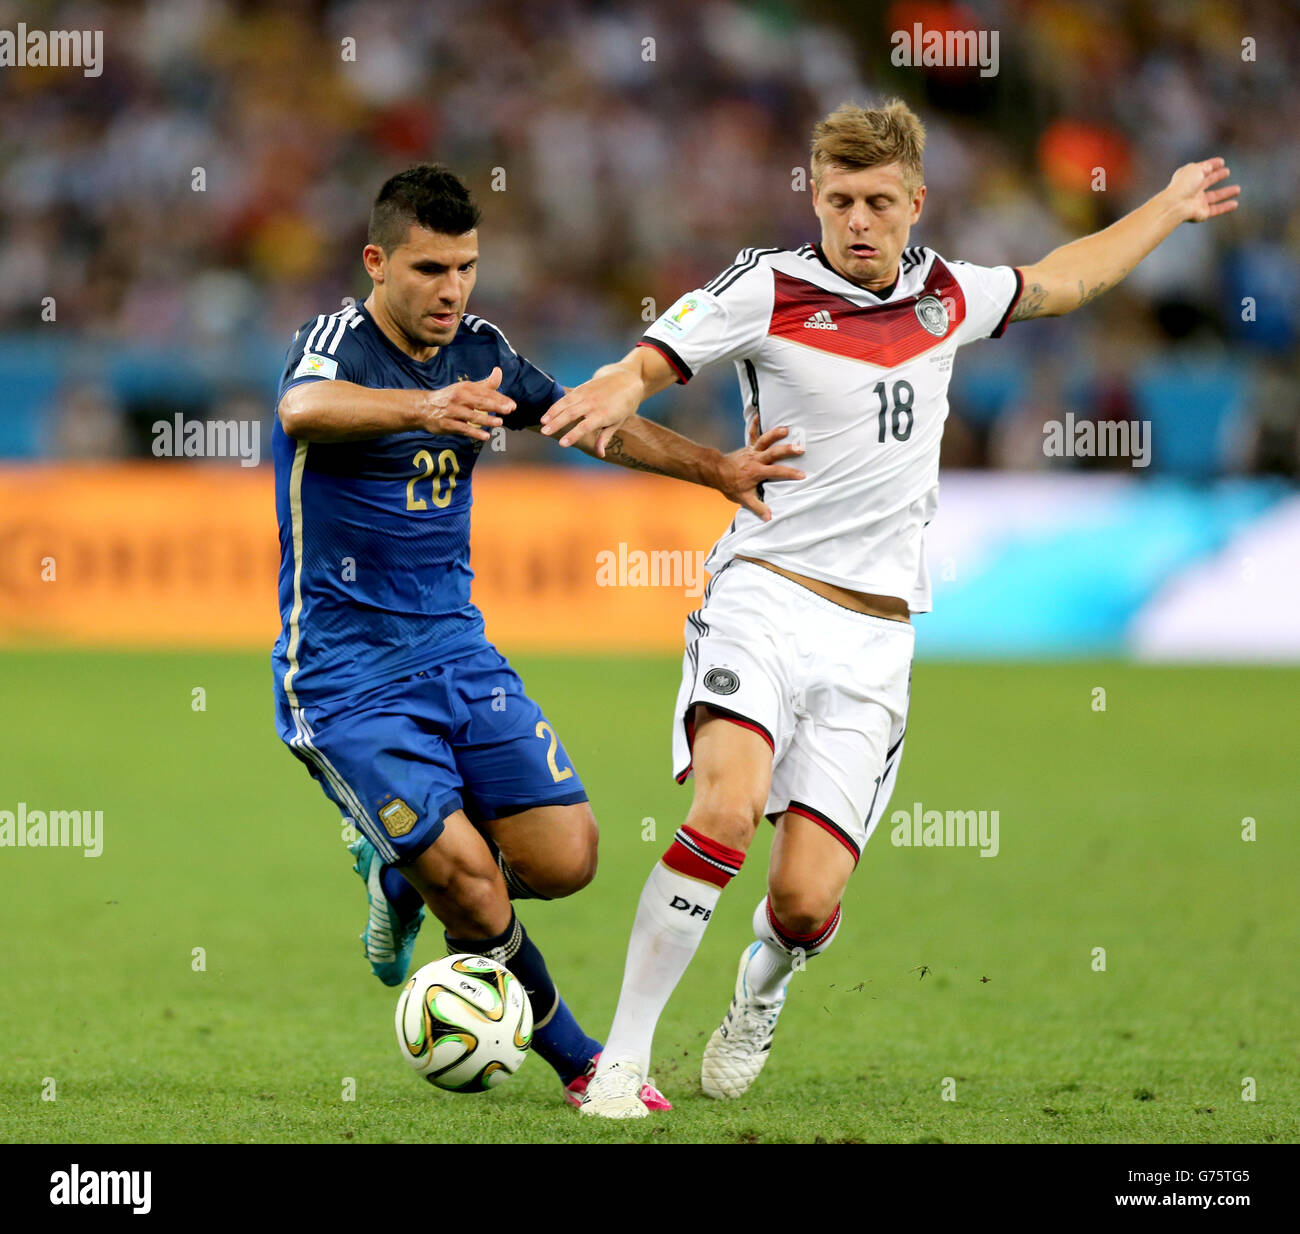 Germany's Toni Kroos (right) and Argentina's Sergio Aguero battle for the ball Stock Photo